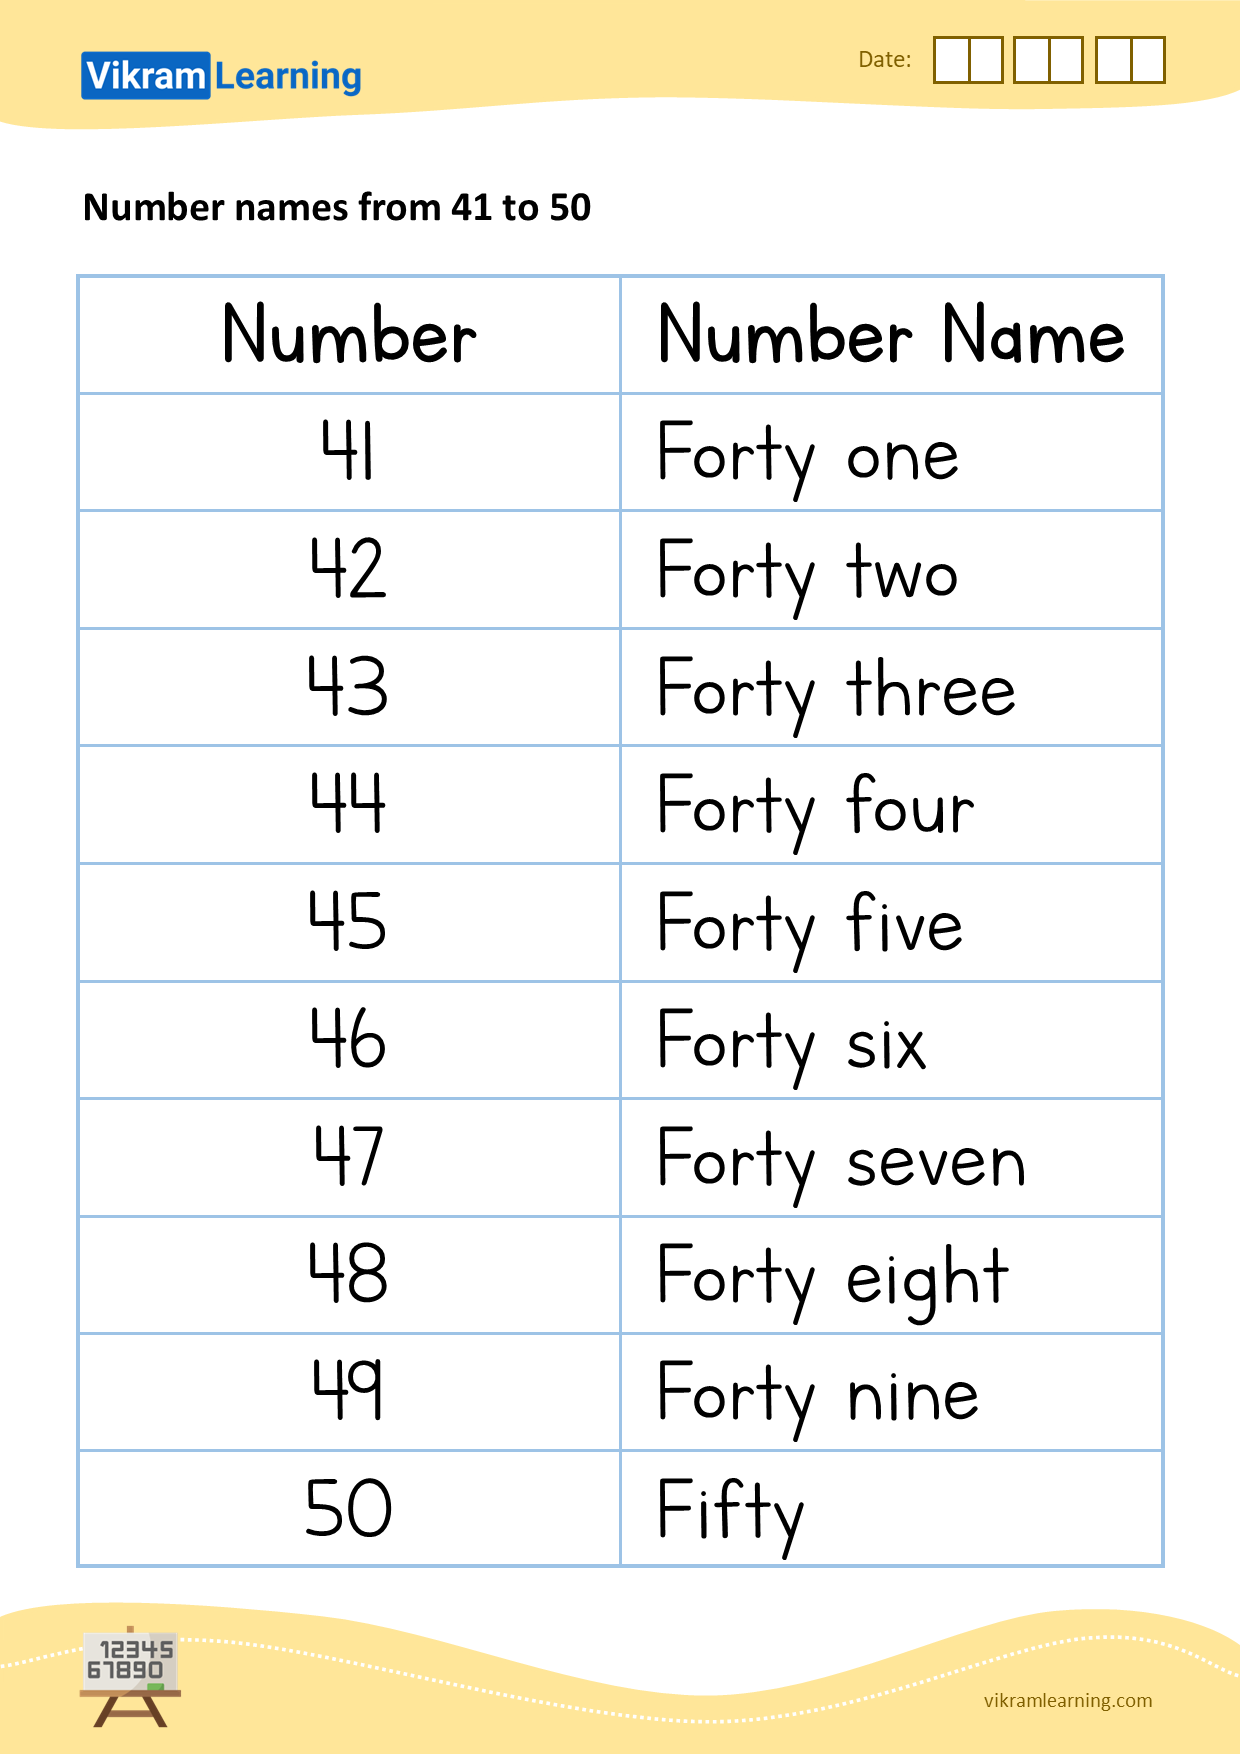 download-number-names-from-41-to-50-worksheets-for-free